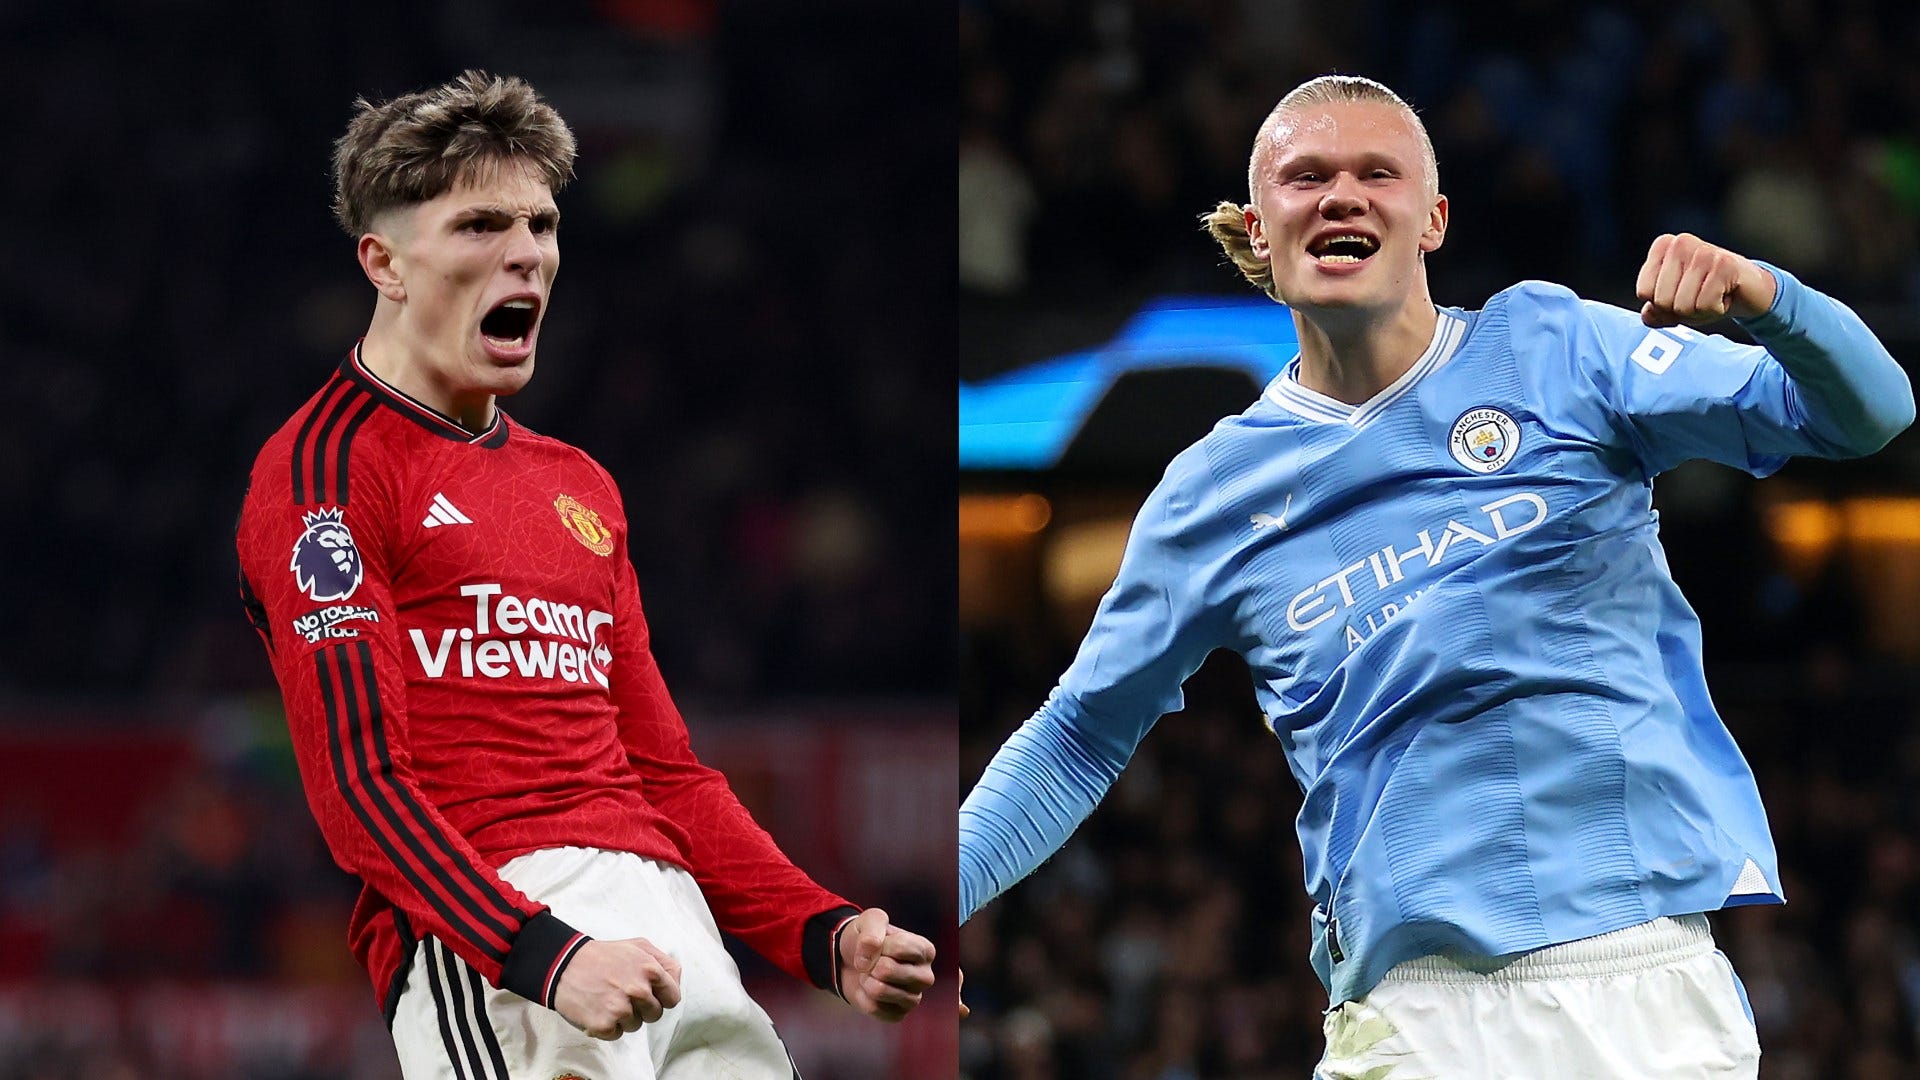 Why is Man City vs Man Utd being played at an unusual time? Reason for early Manchester derby kick-off explained